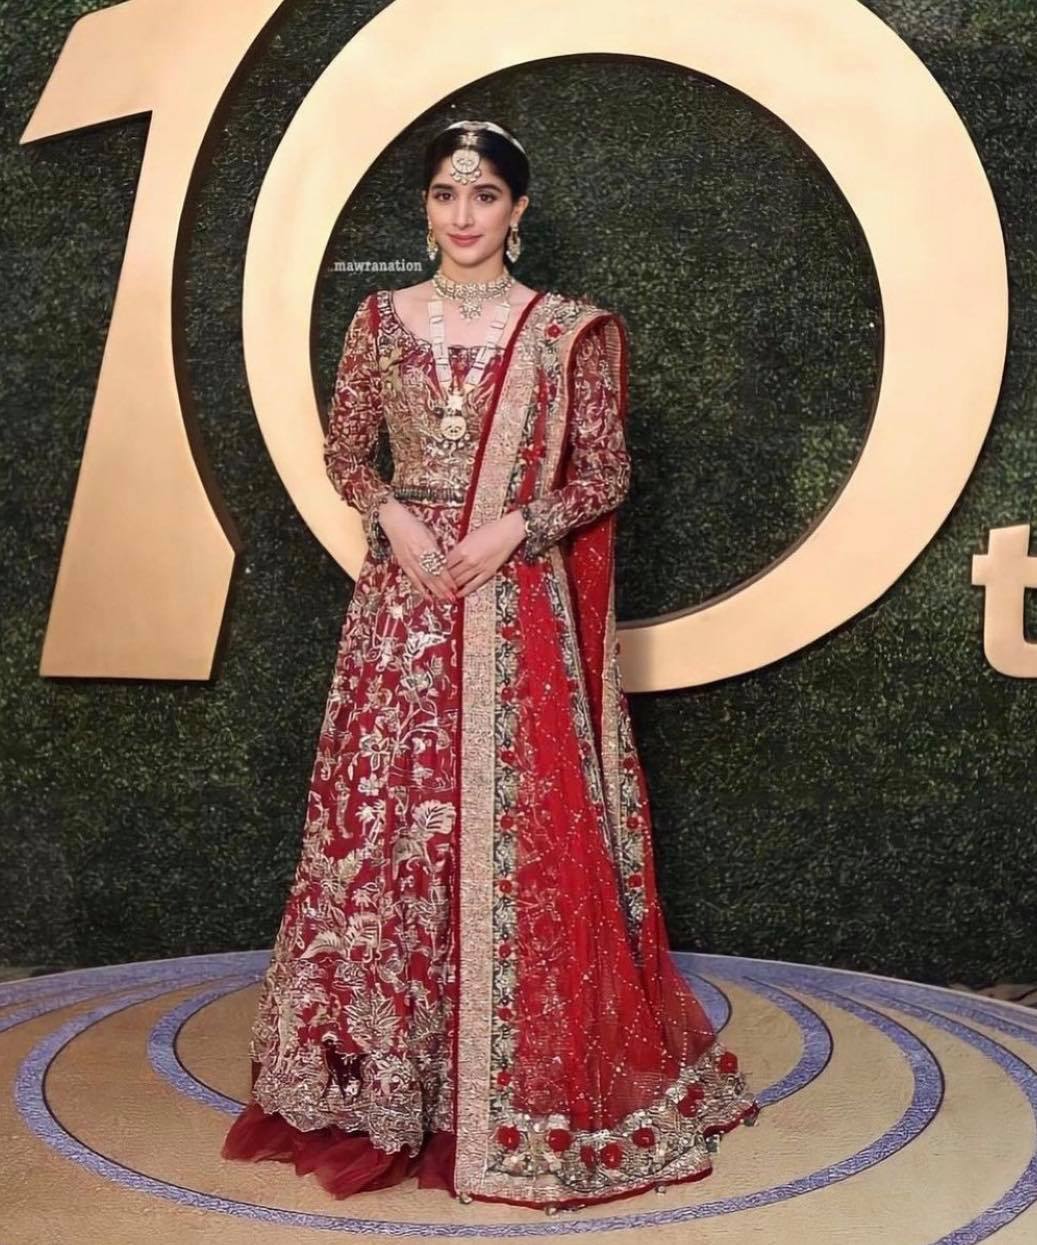 Best Bridal Looks From Bridal Couture Week 2021